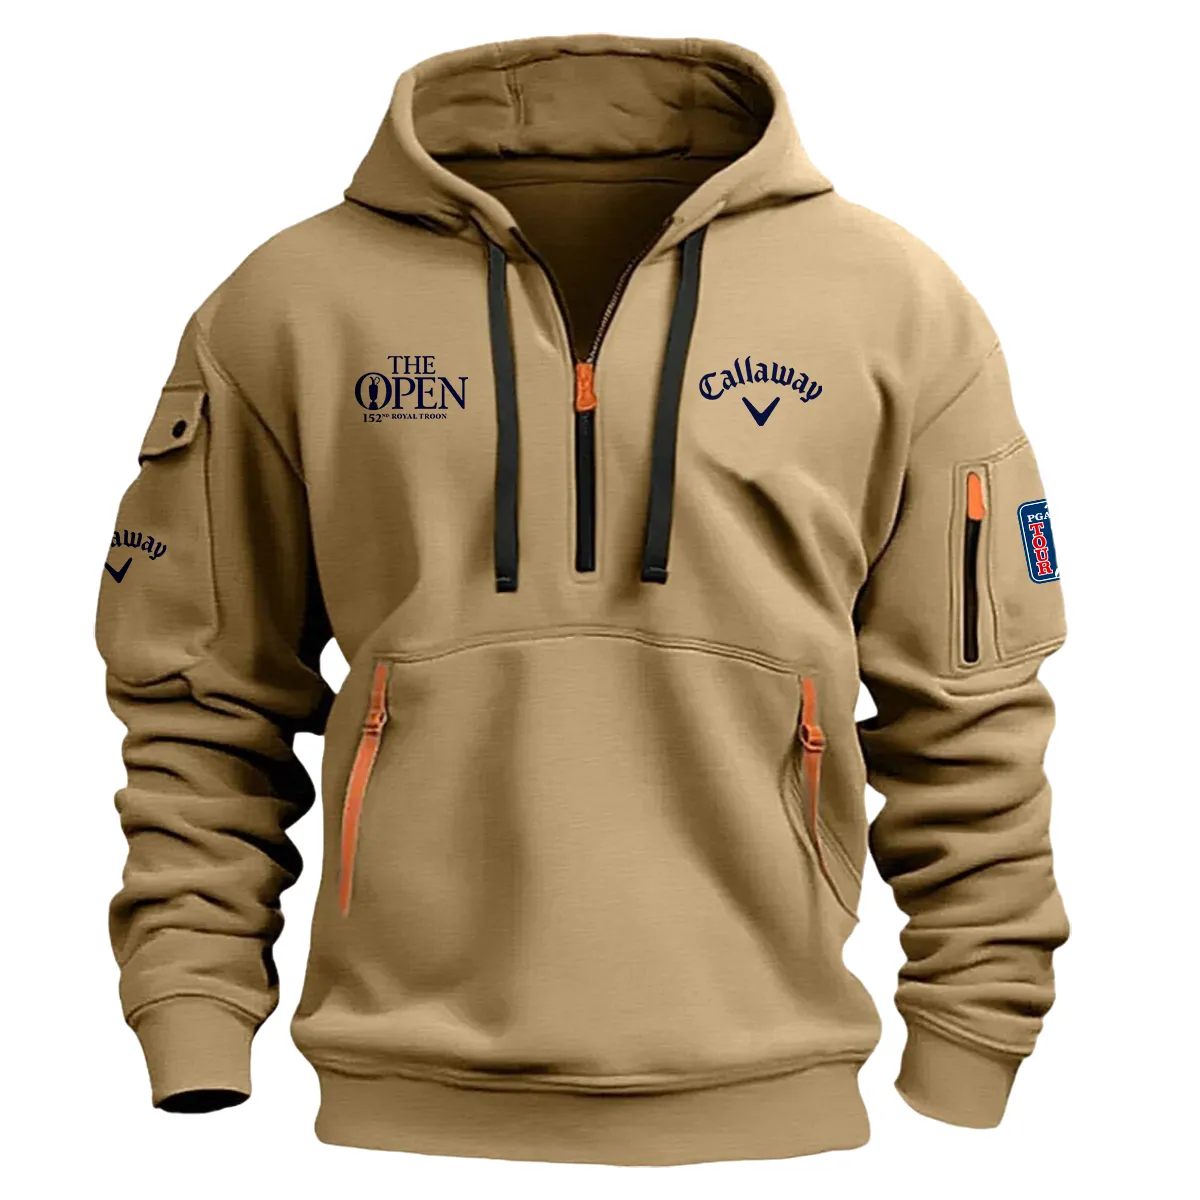 Khaki Color Callaway Fashion Hoodie Half Zipper 152nd The Open Championship Gift For Fans